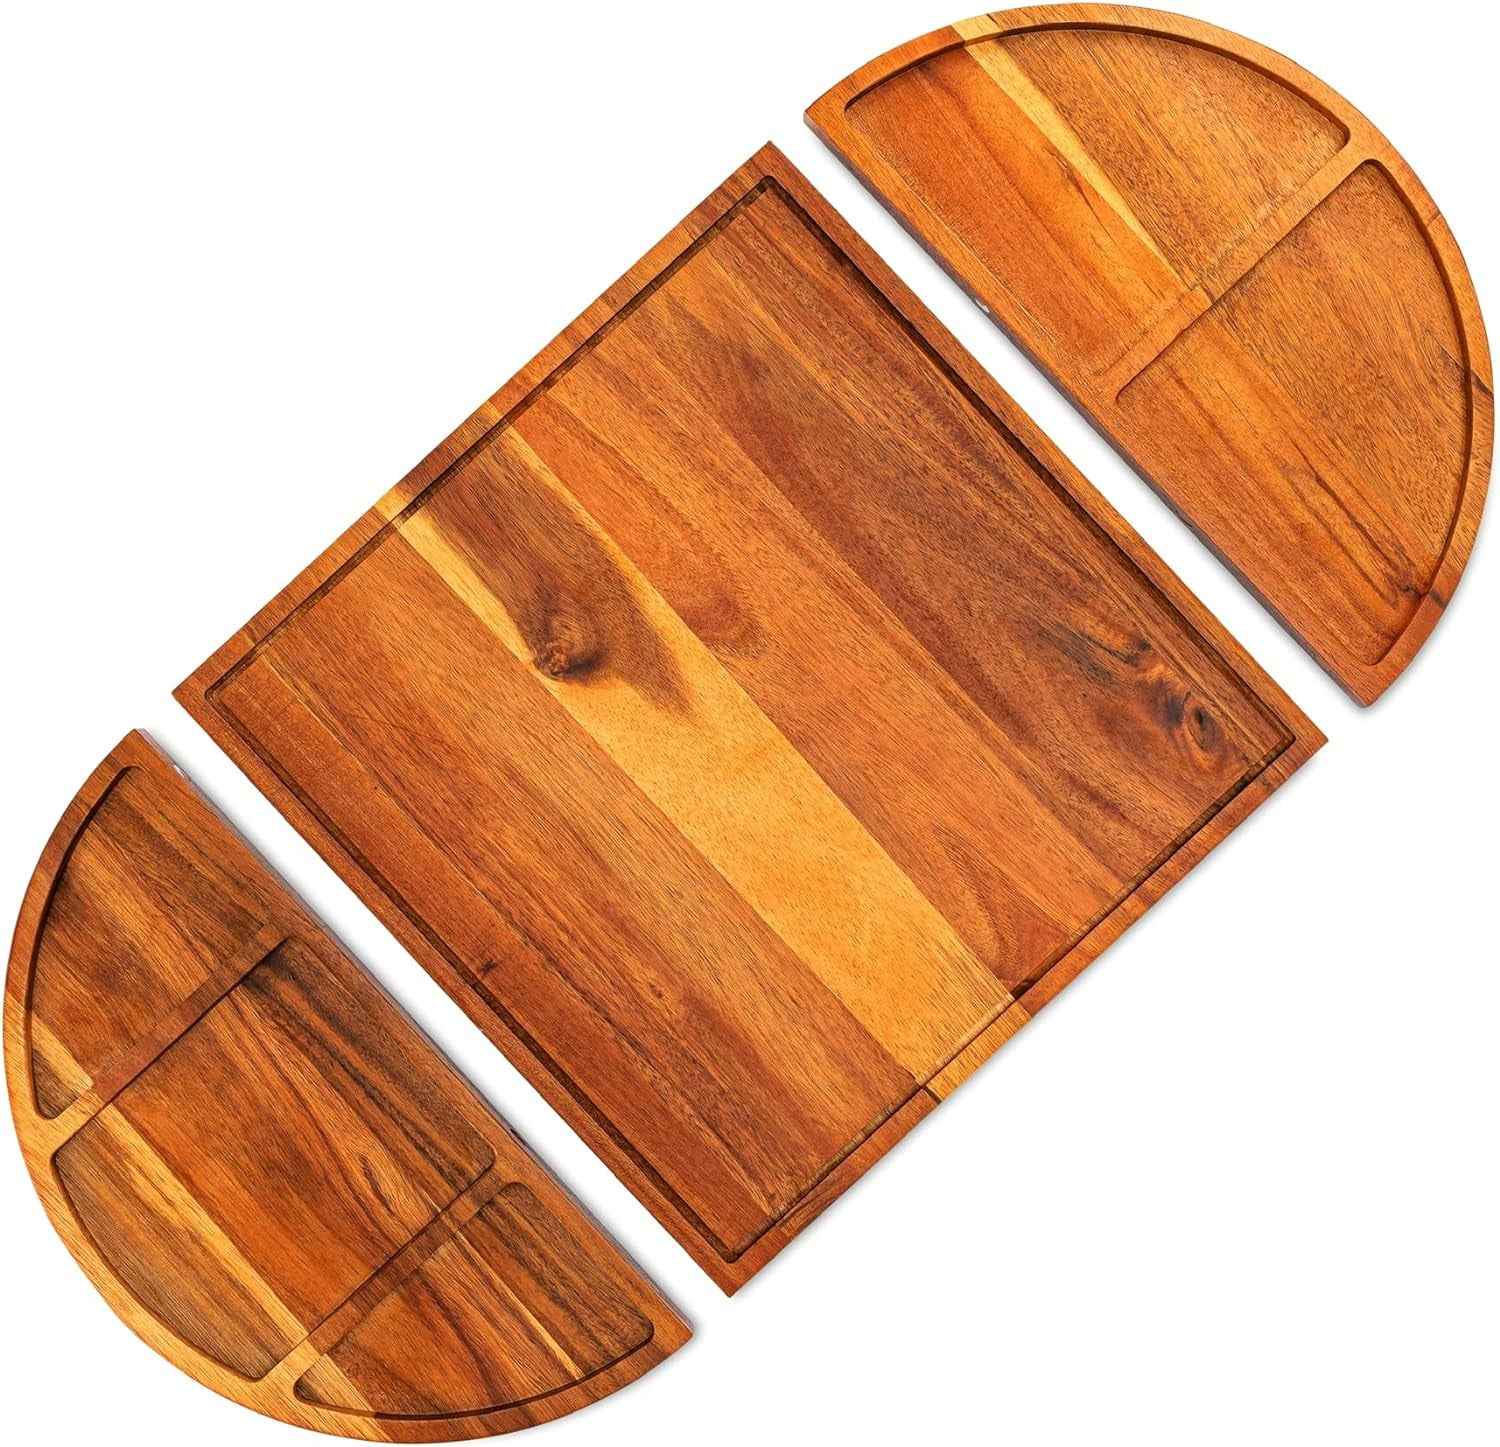 Large Wooden Charcuterie Board – Market with a B.